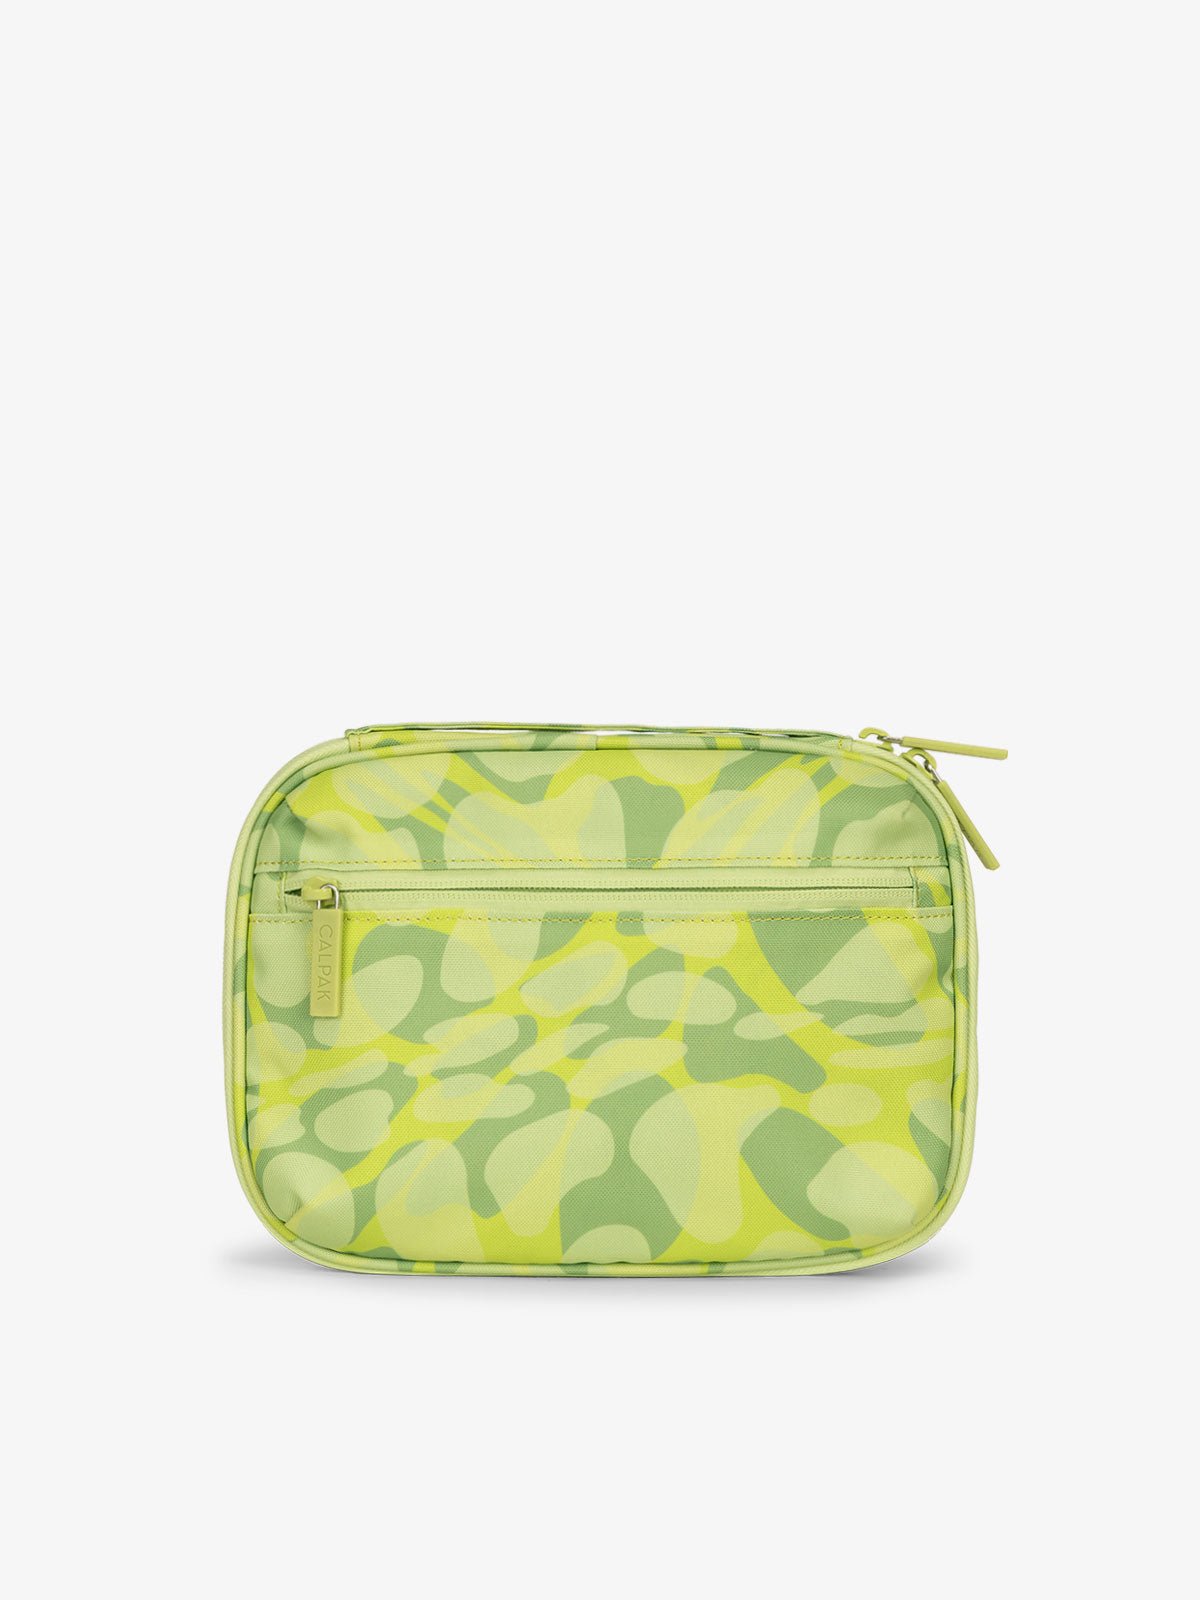 Back-view of tablet organizer featuring zippered pouch in abstract green print